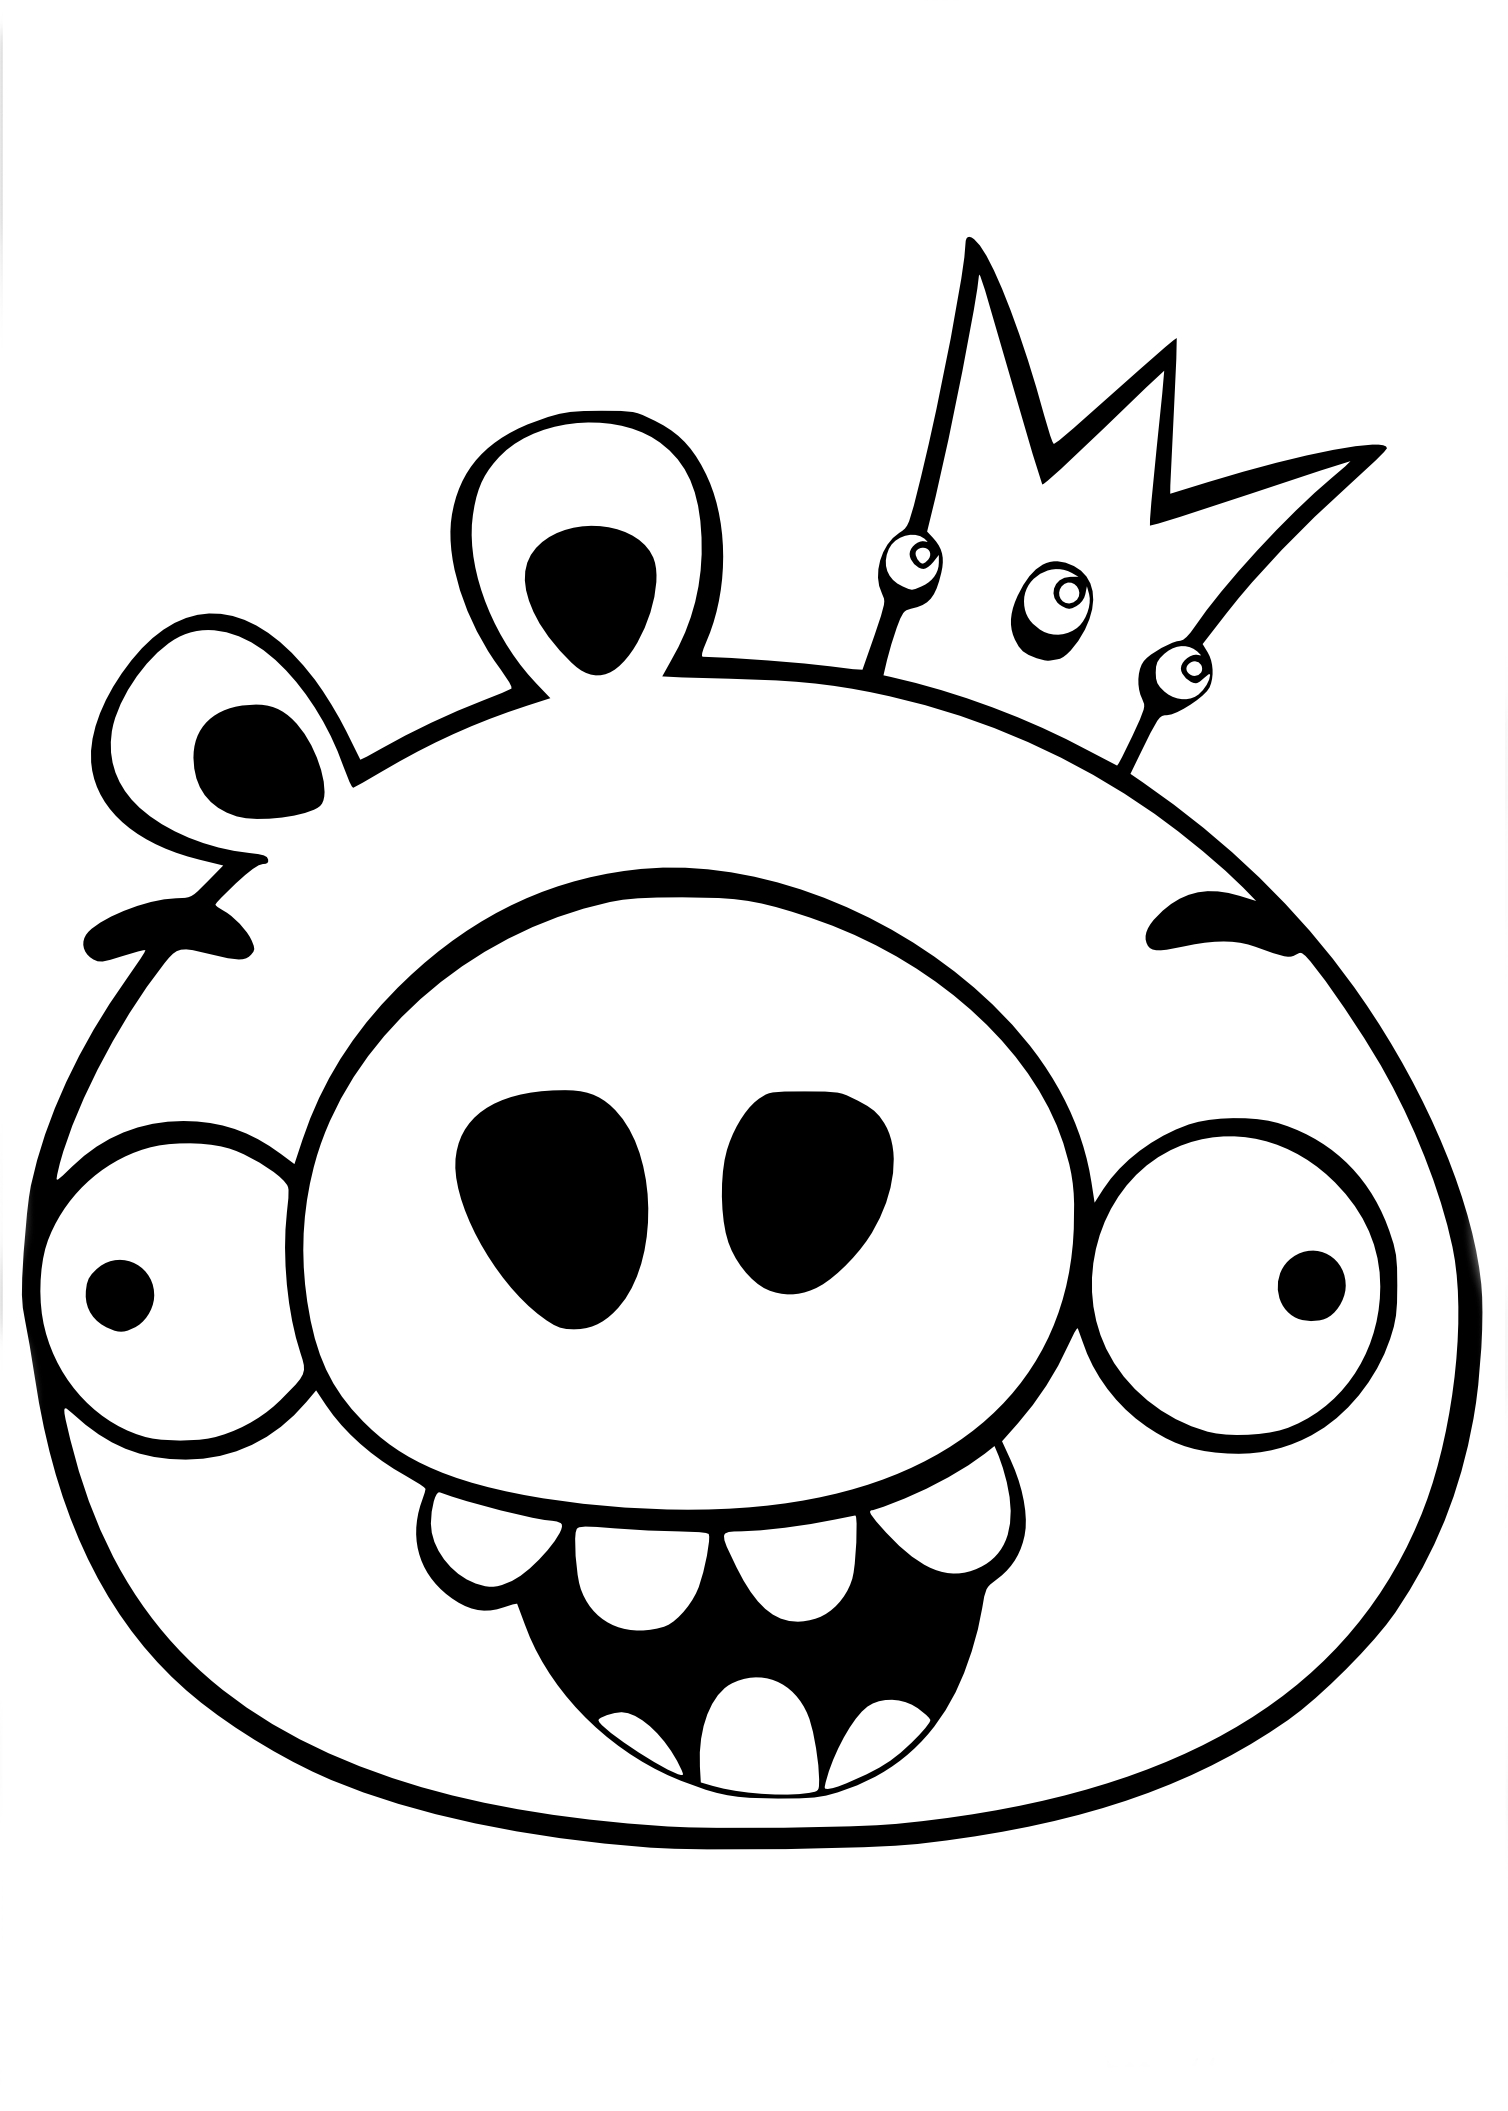 King Pig coloring page